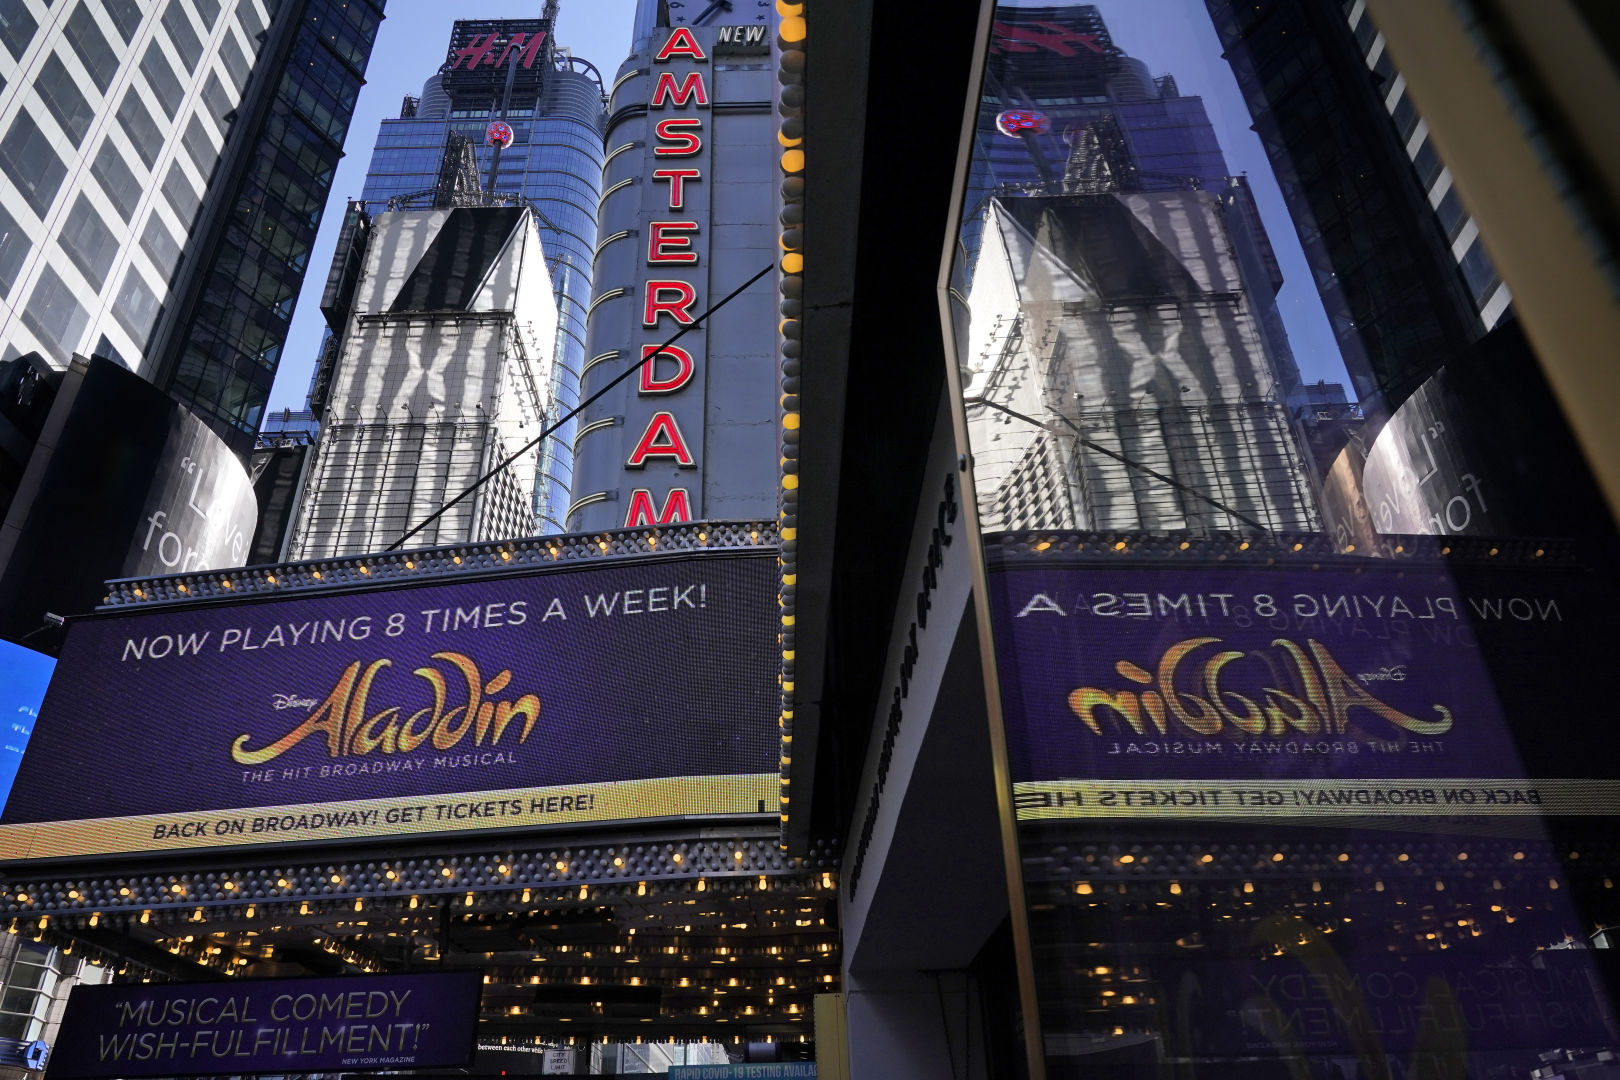 Ready to catch a Broadway show? Check out these shows and how to score